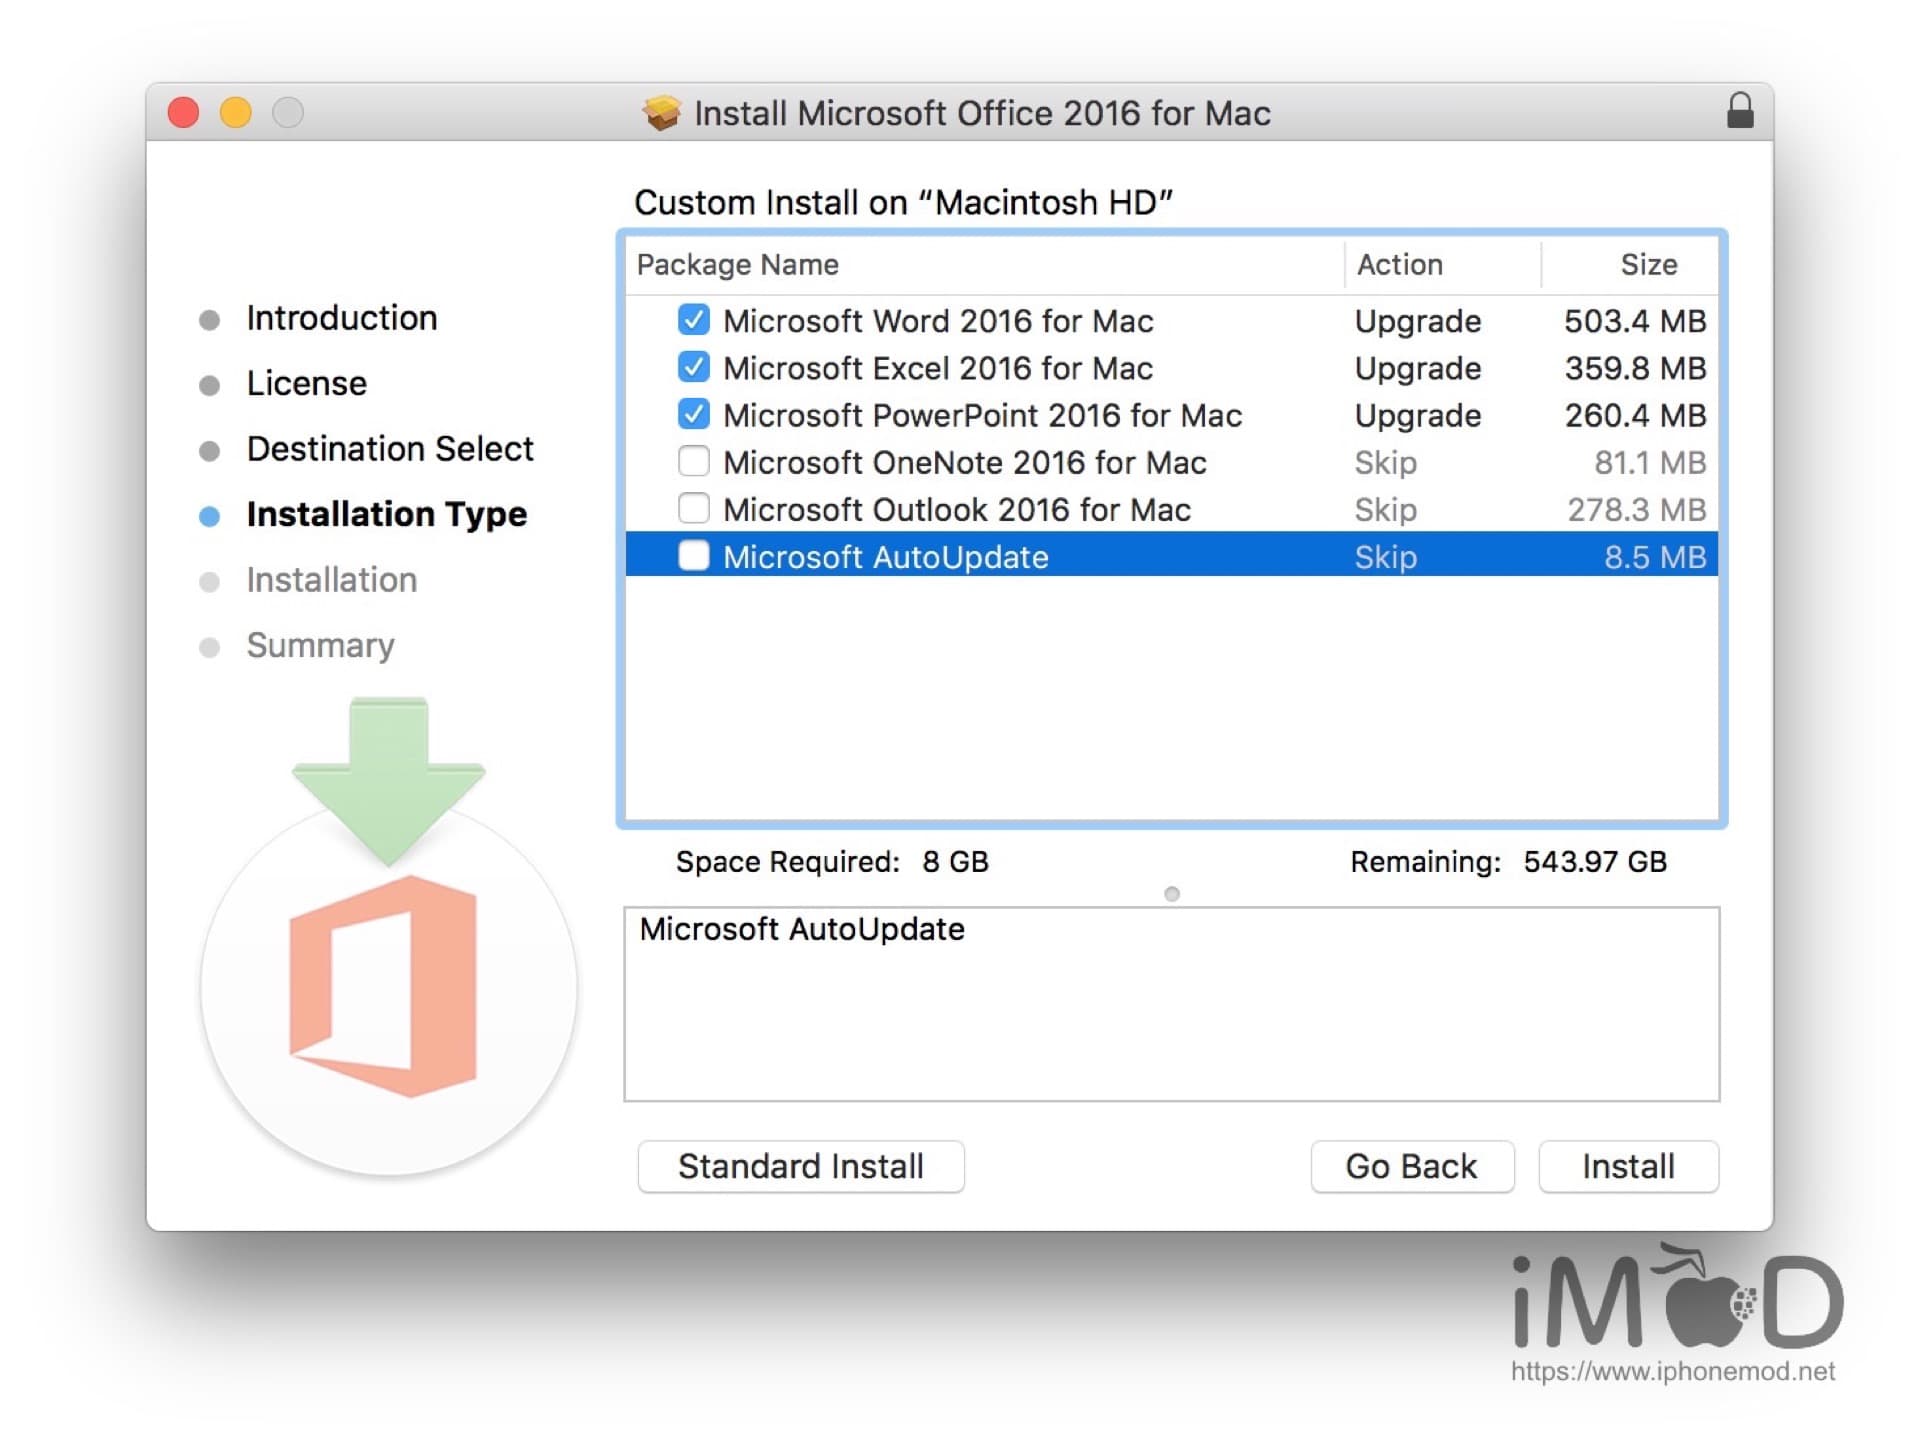 office 365 for mac permanent